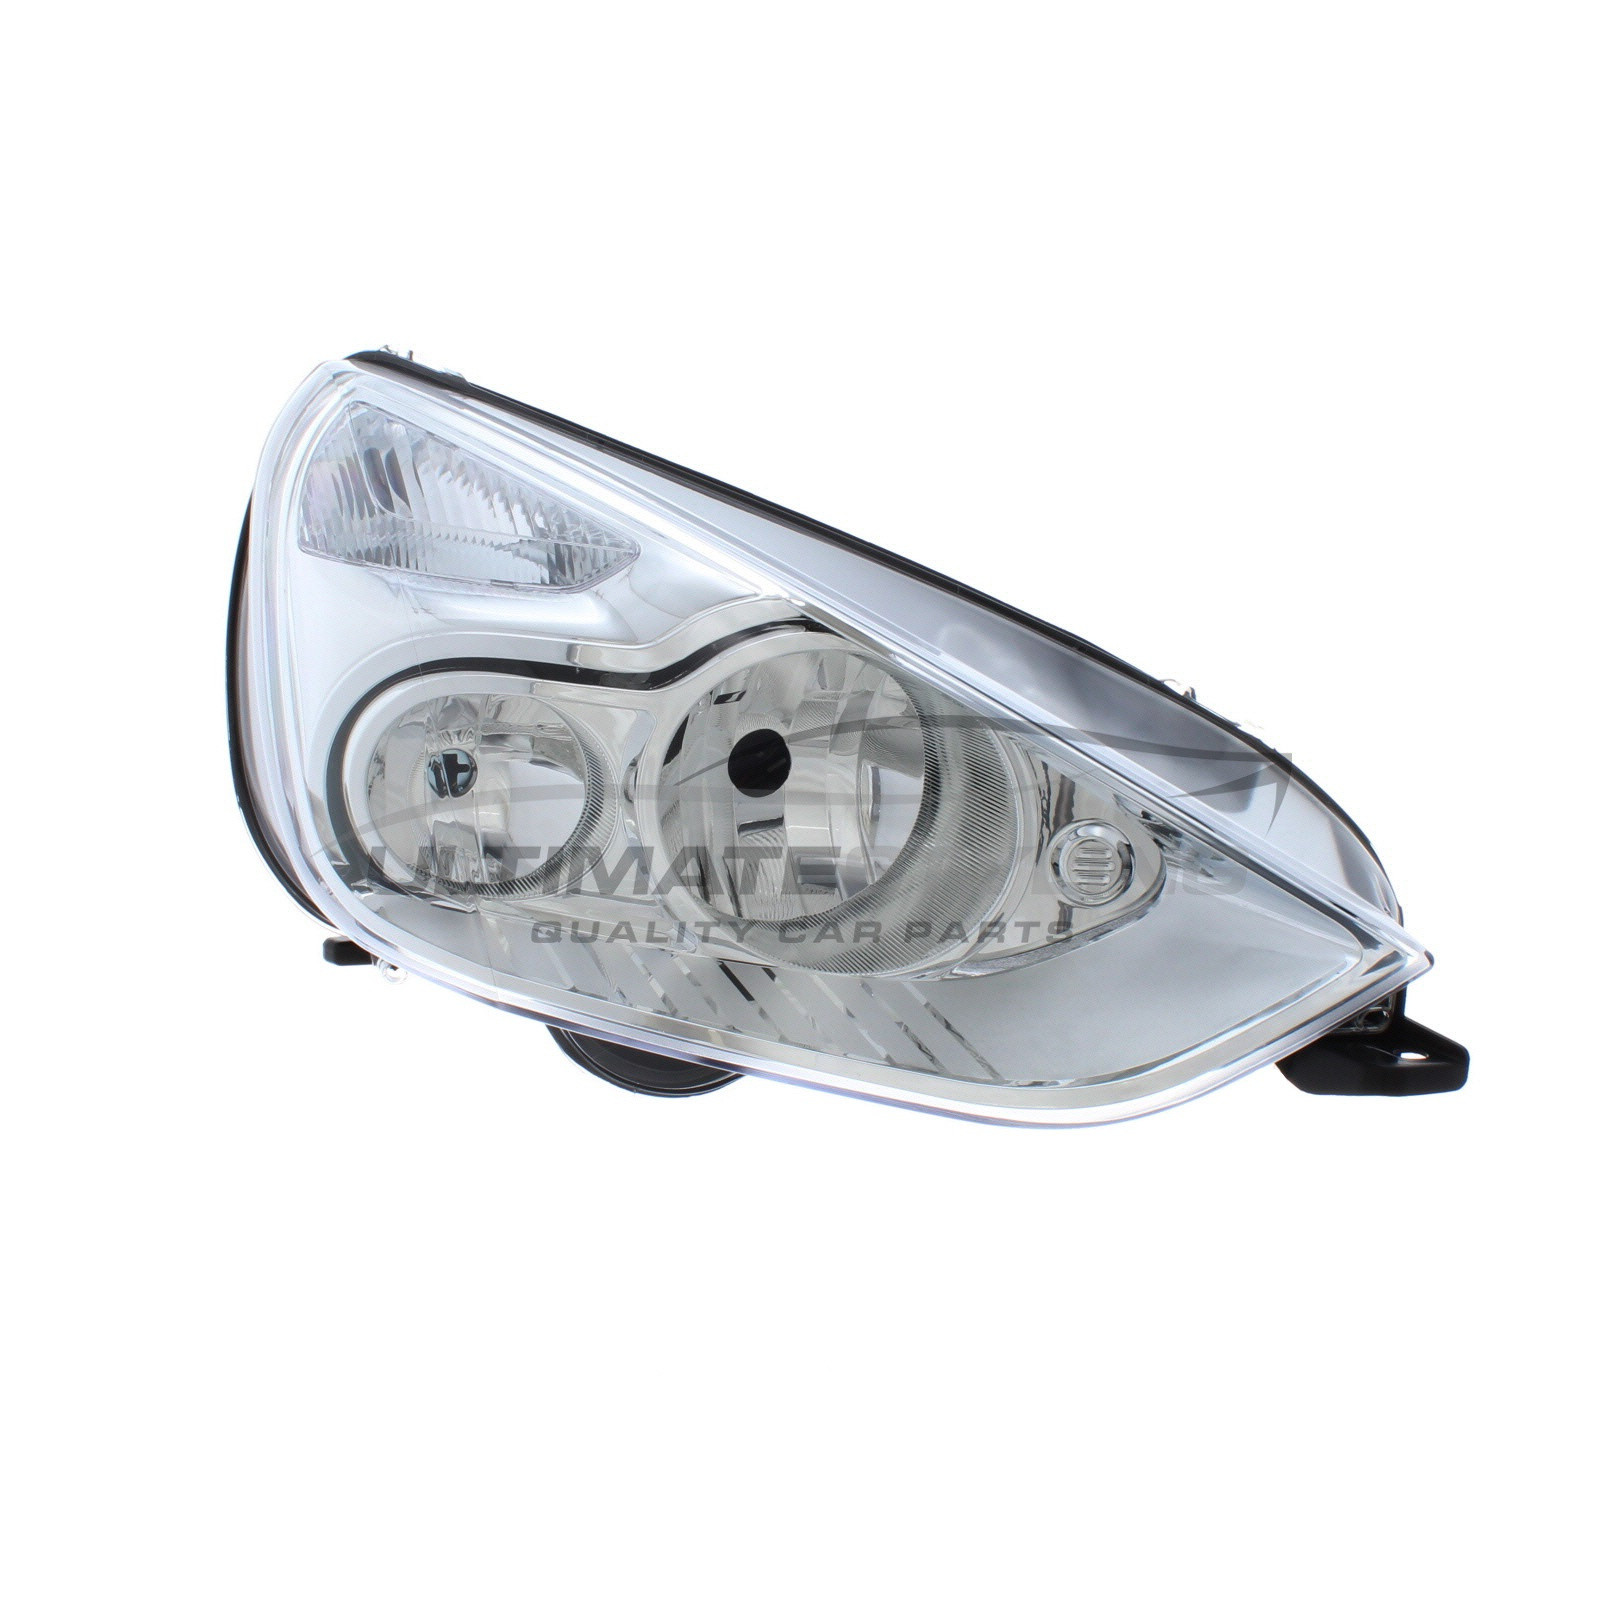 Ford Galaxy 2006-2015, S-MAX 2006-2015 Halogen, Electric With Motor, Chrome Headlight / Headlamp Drivers Side (RH)